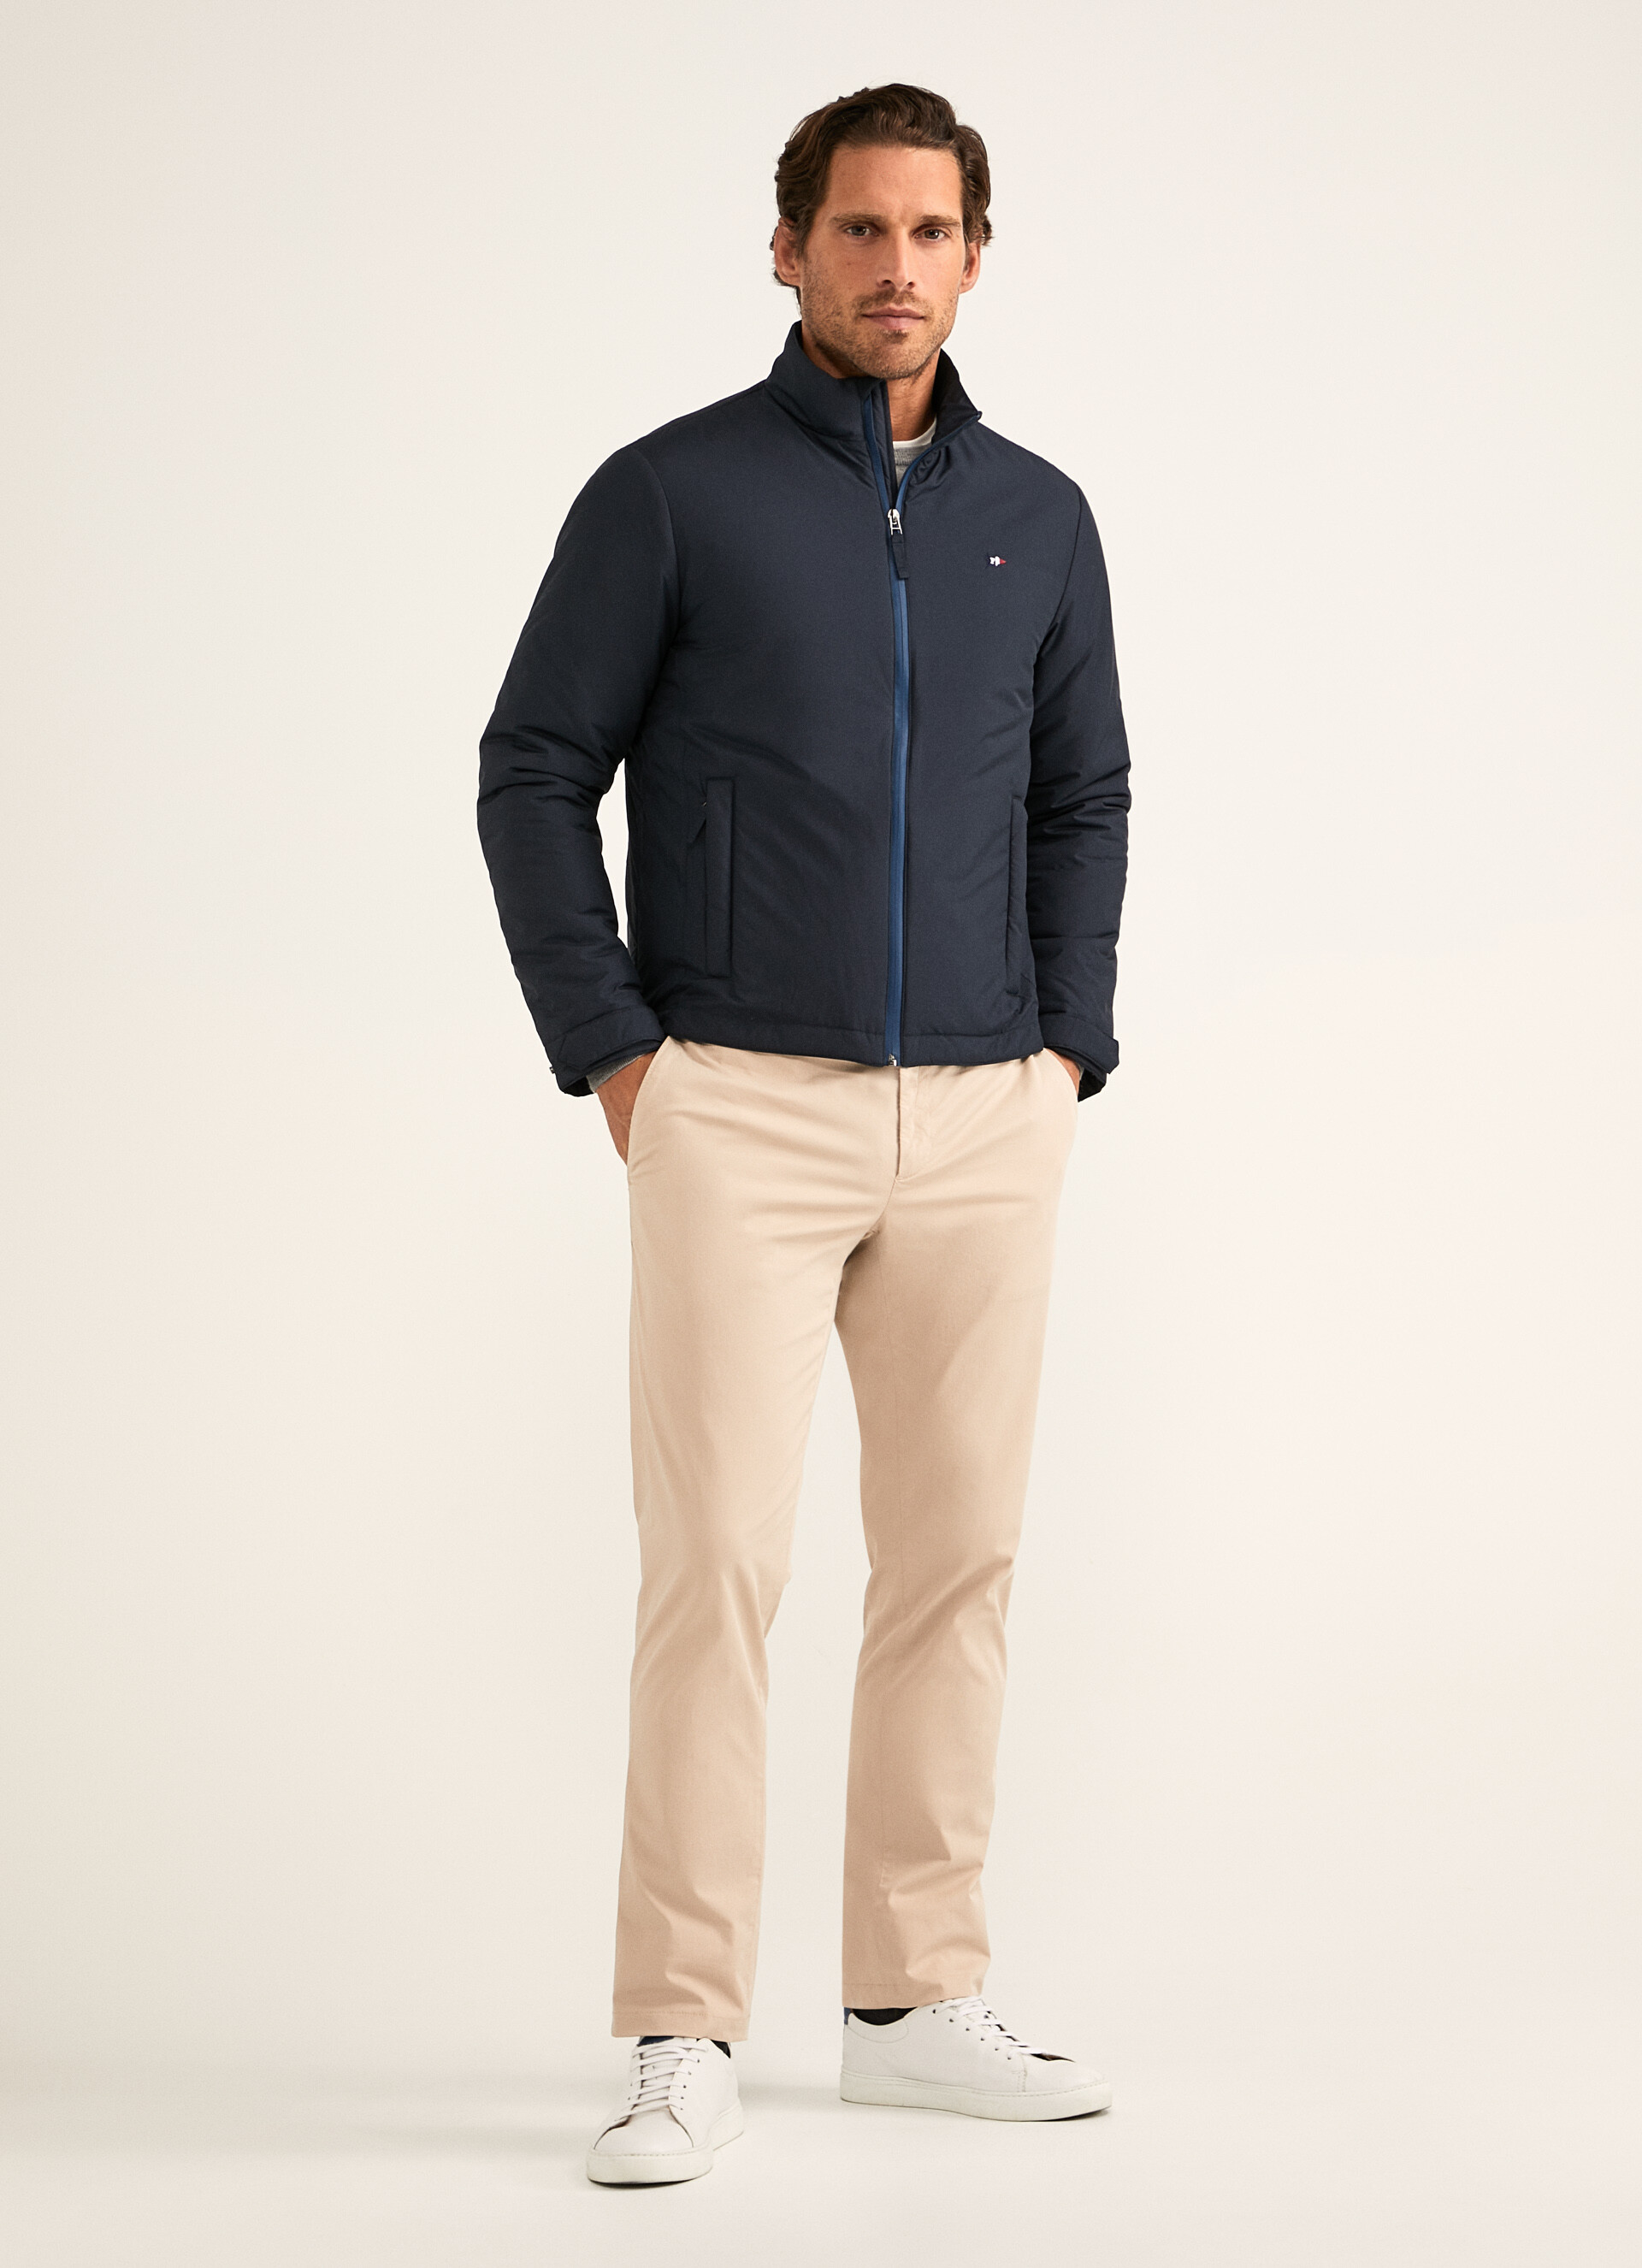 Men's Jackets & Blazers - Spring and Winter Jackets for Men 